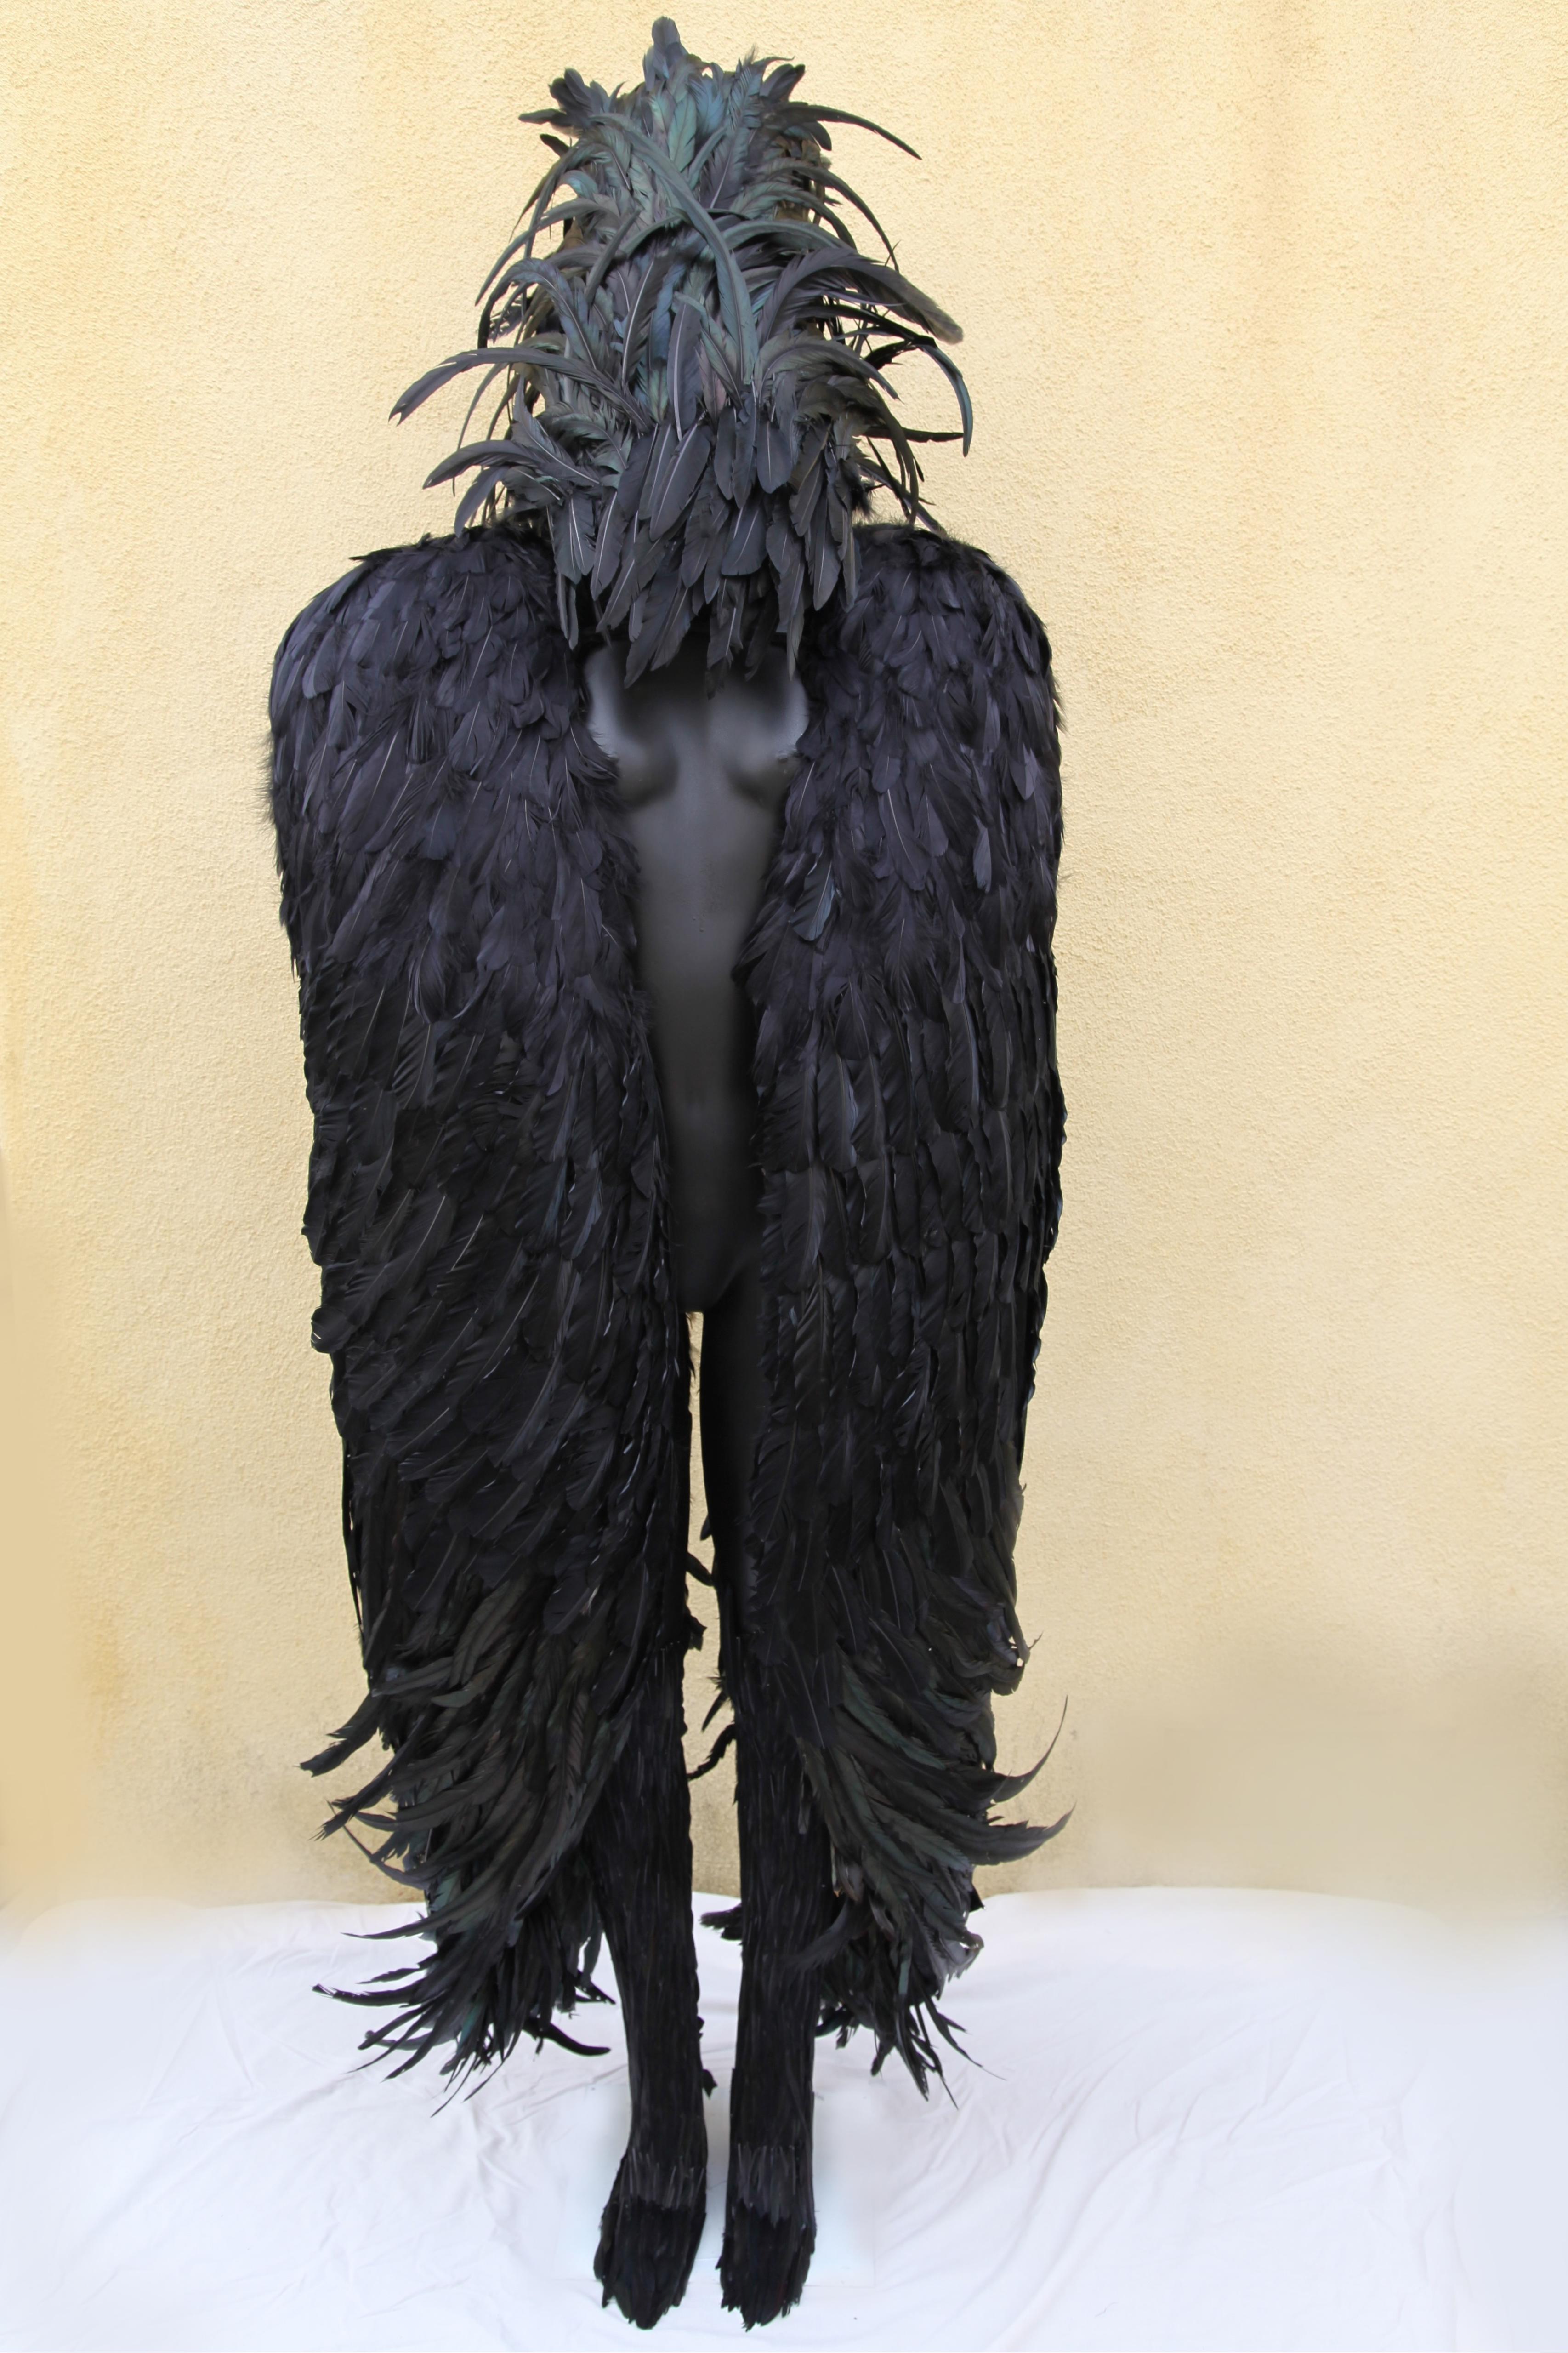 Feathers (wings and helmet) - Sculpture by Melissa Meier